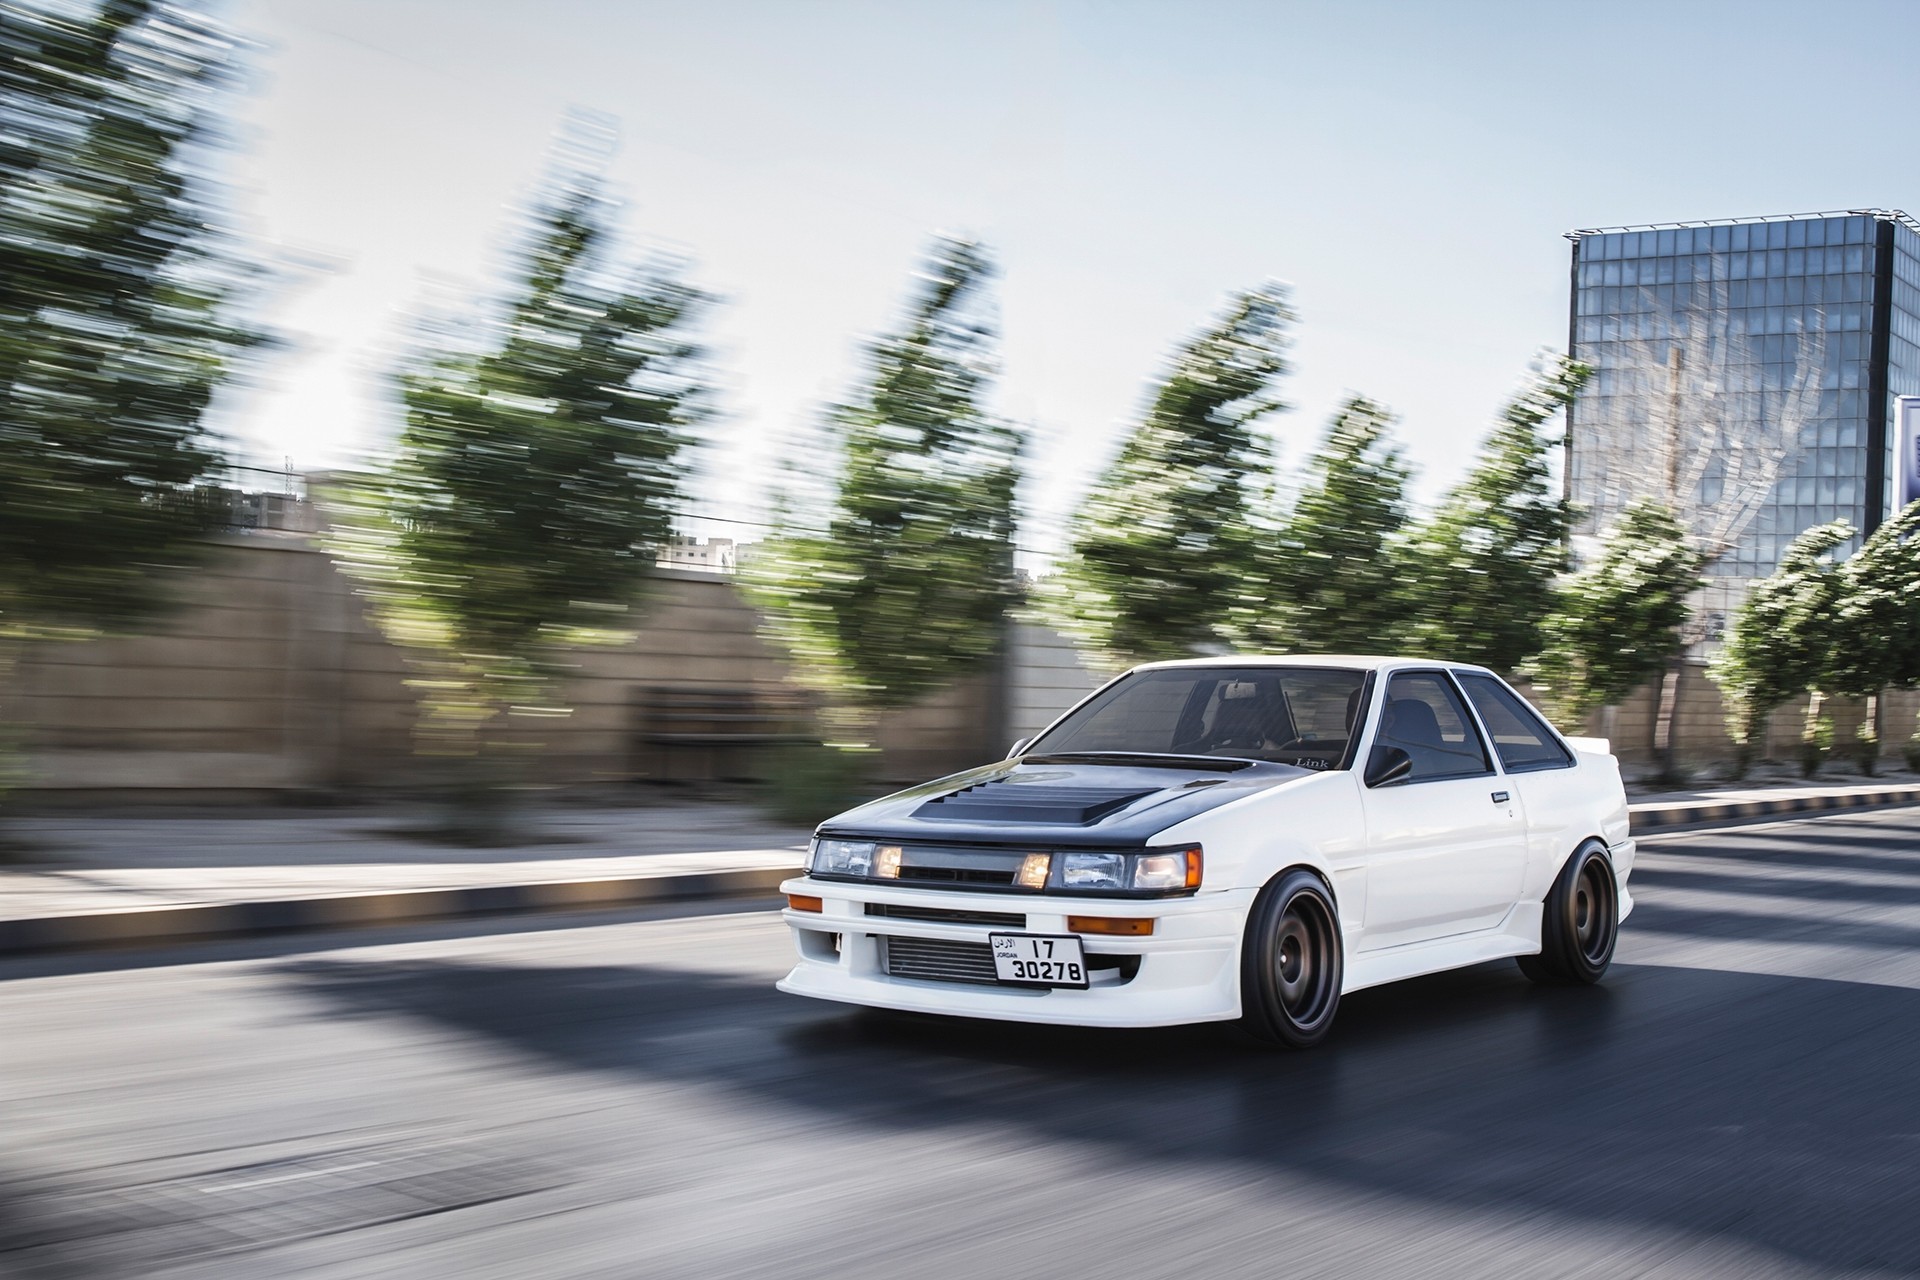 1920x1280 nice toyota corolla ae86 background desktop wallpapers hd high definition  windows 10 mac apple colourful images backgrounds download wallpaper  1920Ã1280 ...